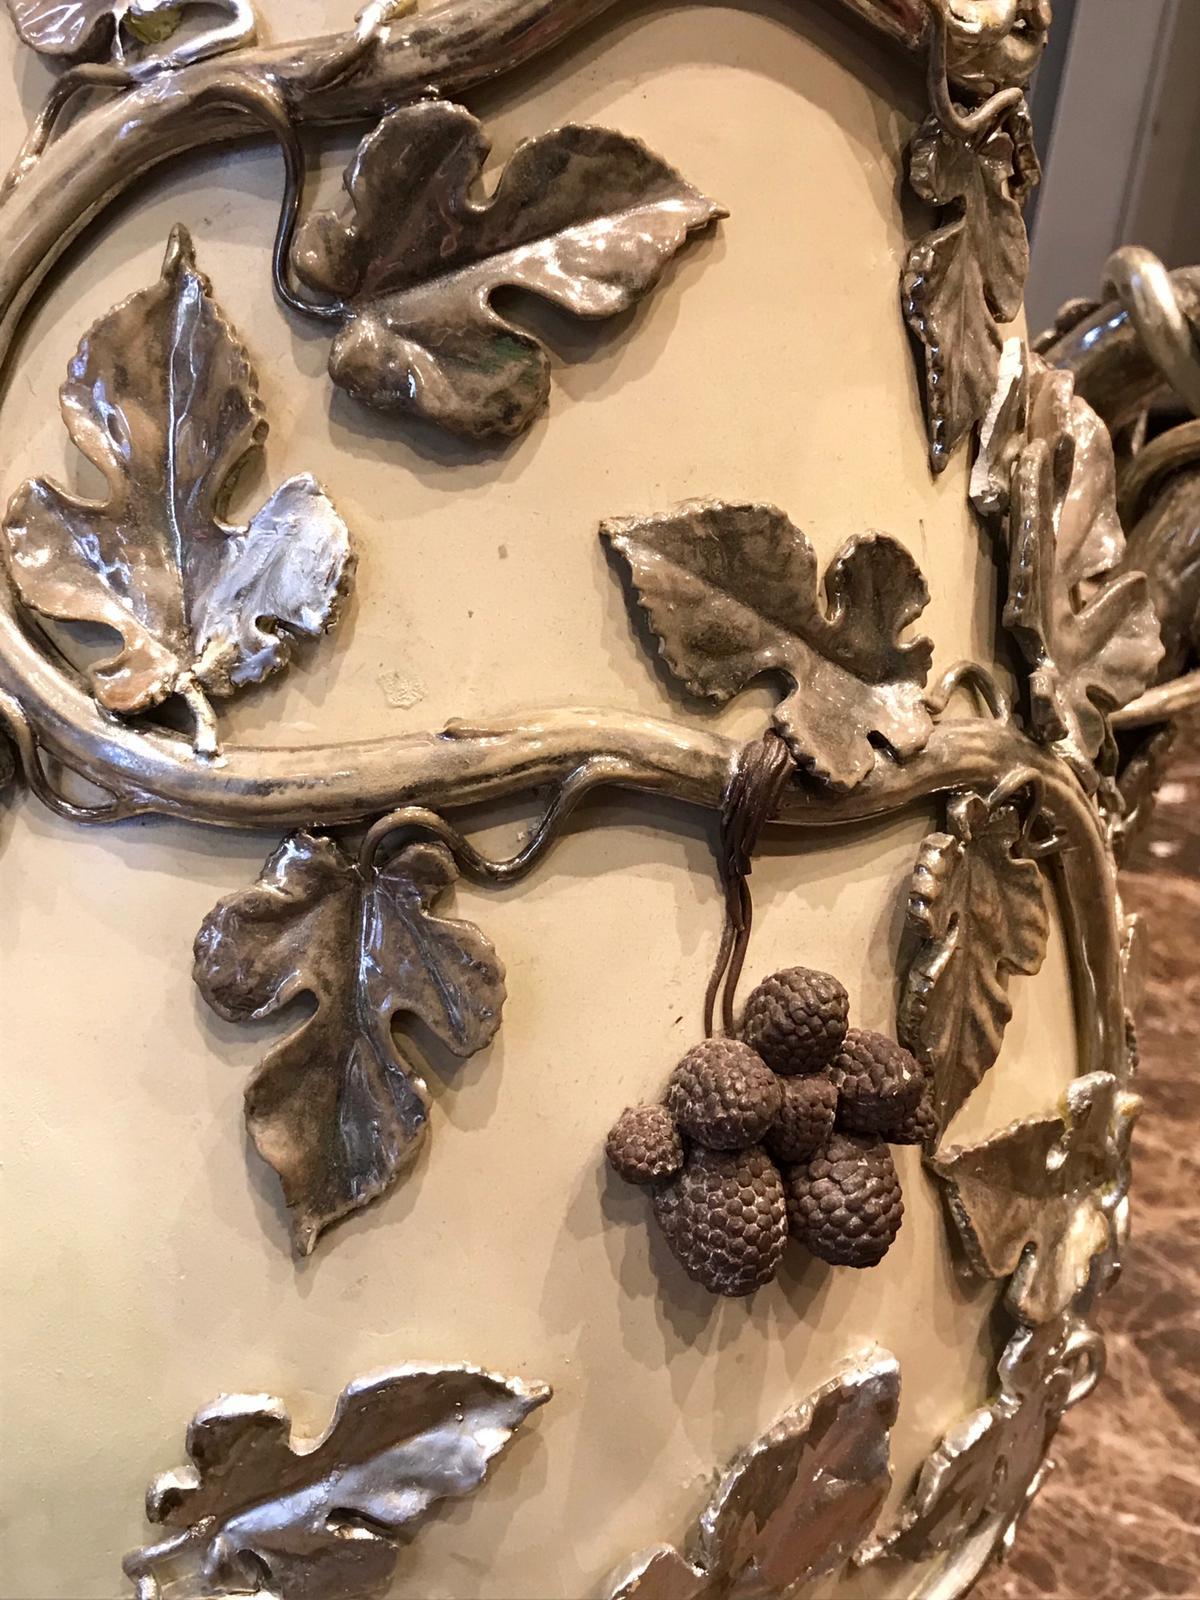 Of a baluster form with a flaring neck with a beaded design, the vase is made of a buff coloured stoneware, covered with a vine, leaf and berry motif that also forms two low handles. The latter is covered with silver overlay.

Dimensions: Height 75